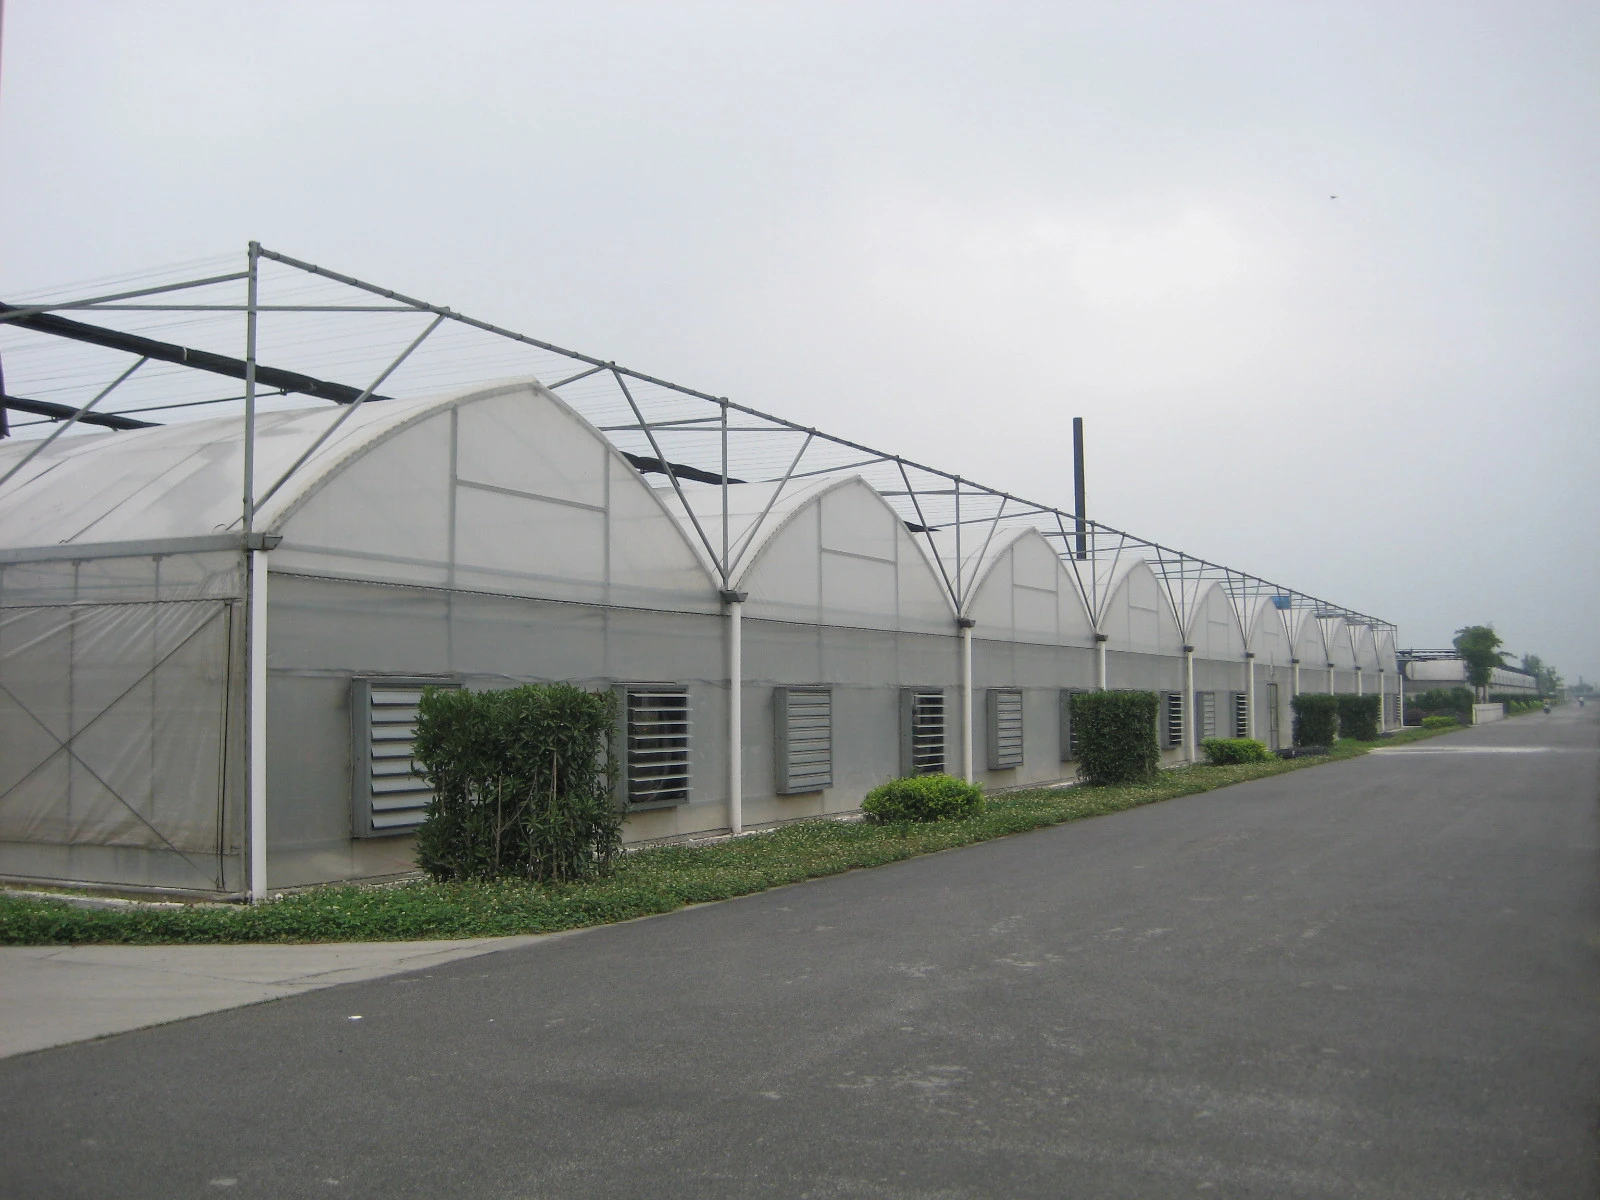 Skyplant Agricultural commercial plastic film tunnel greenhouse